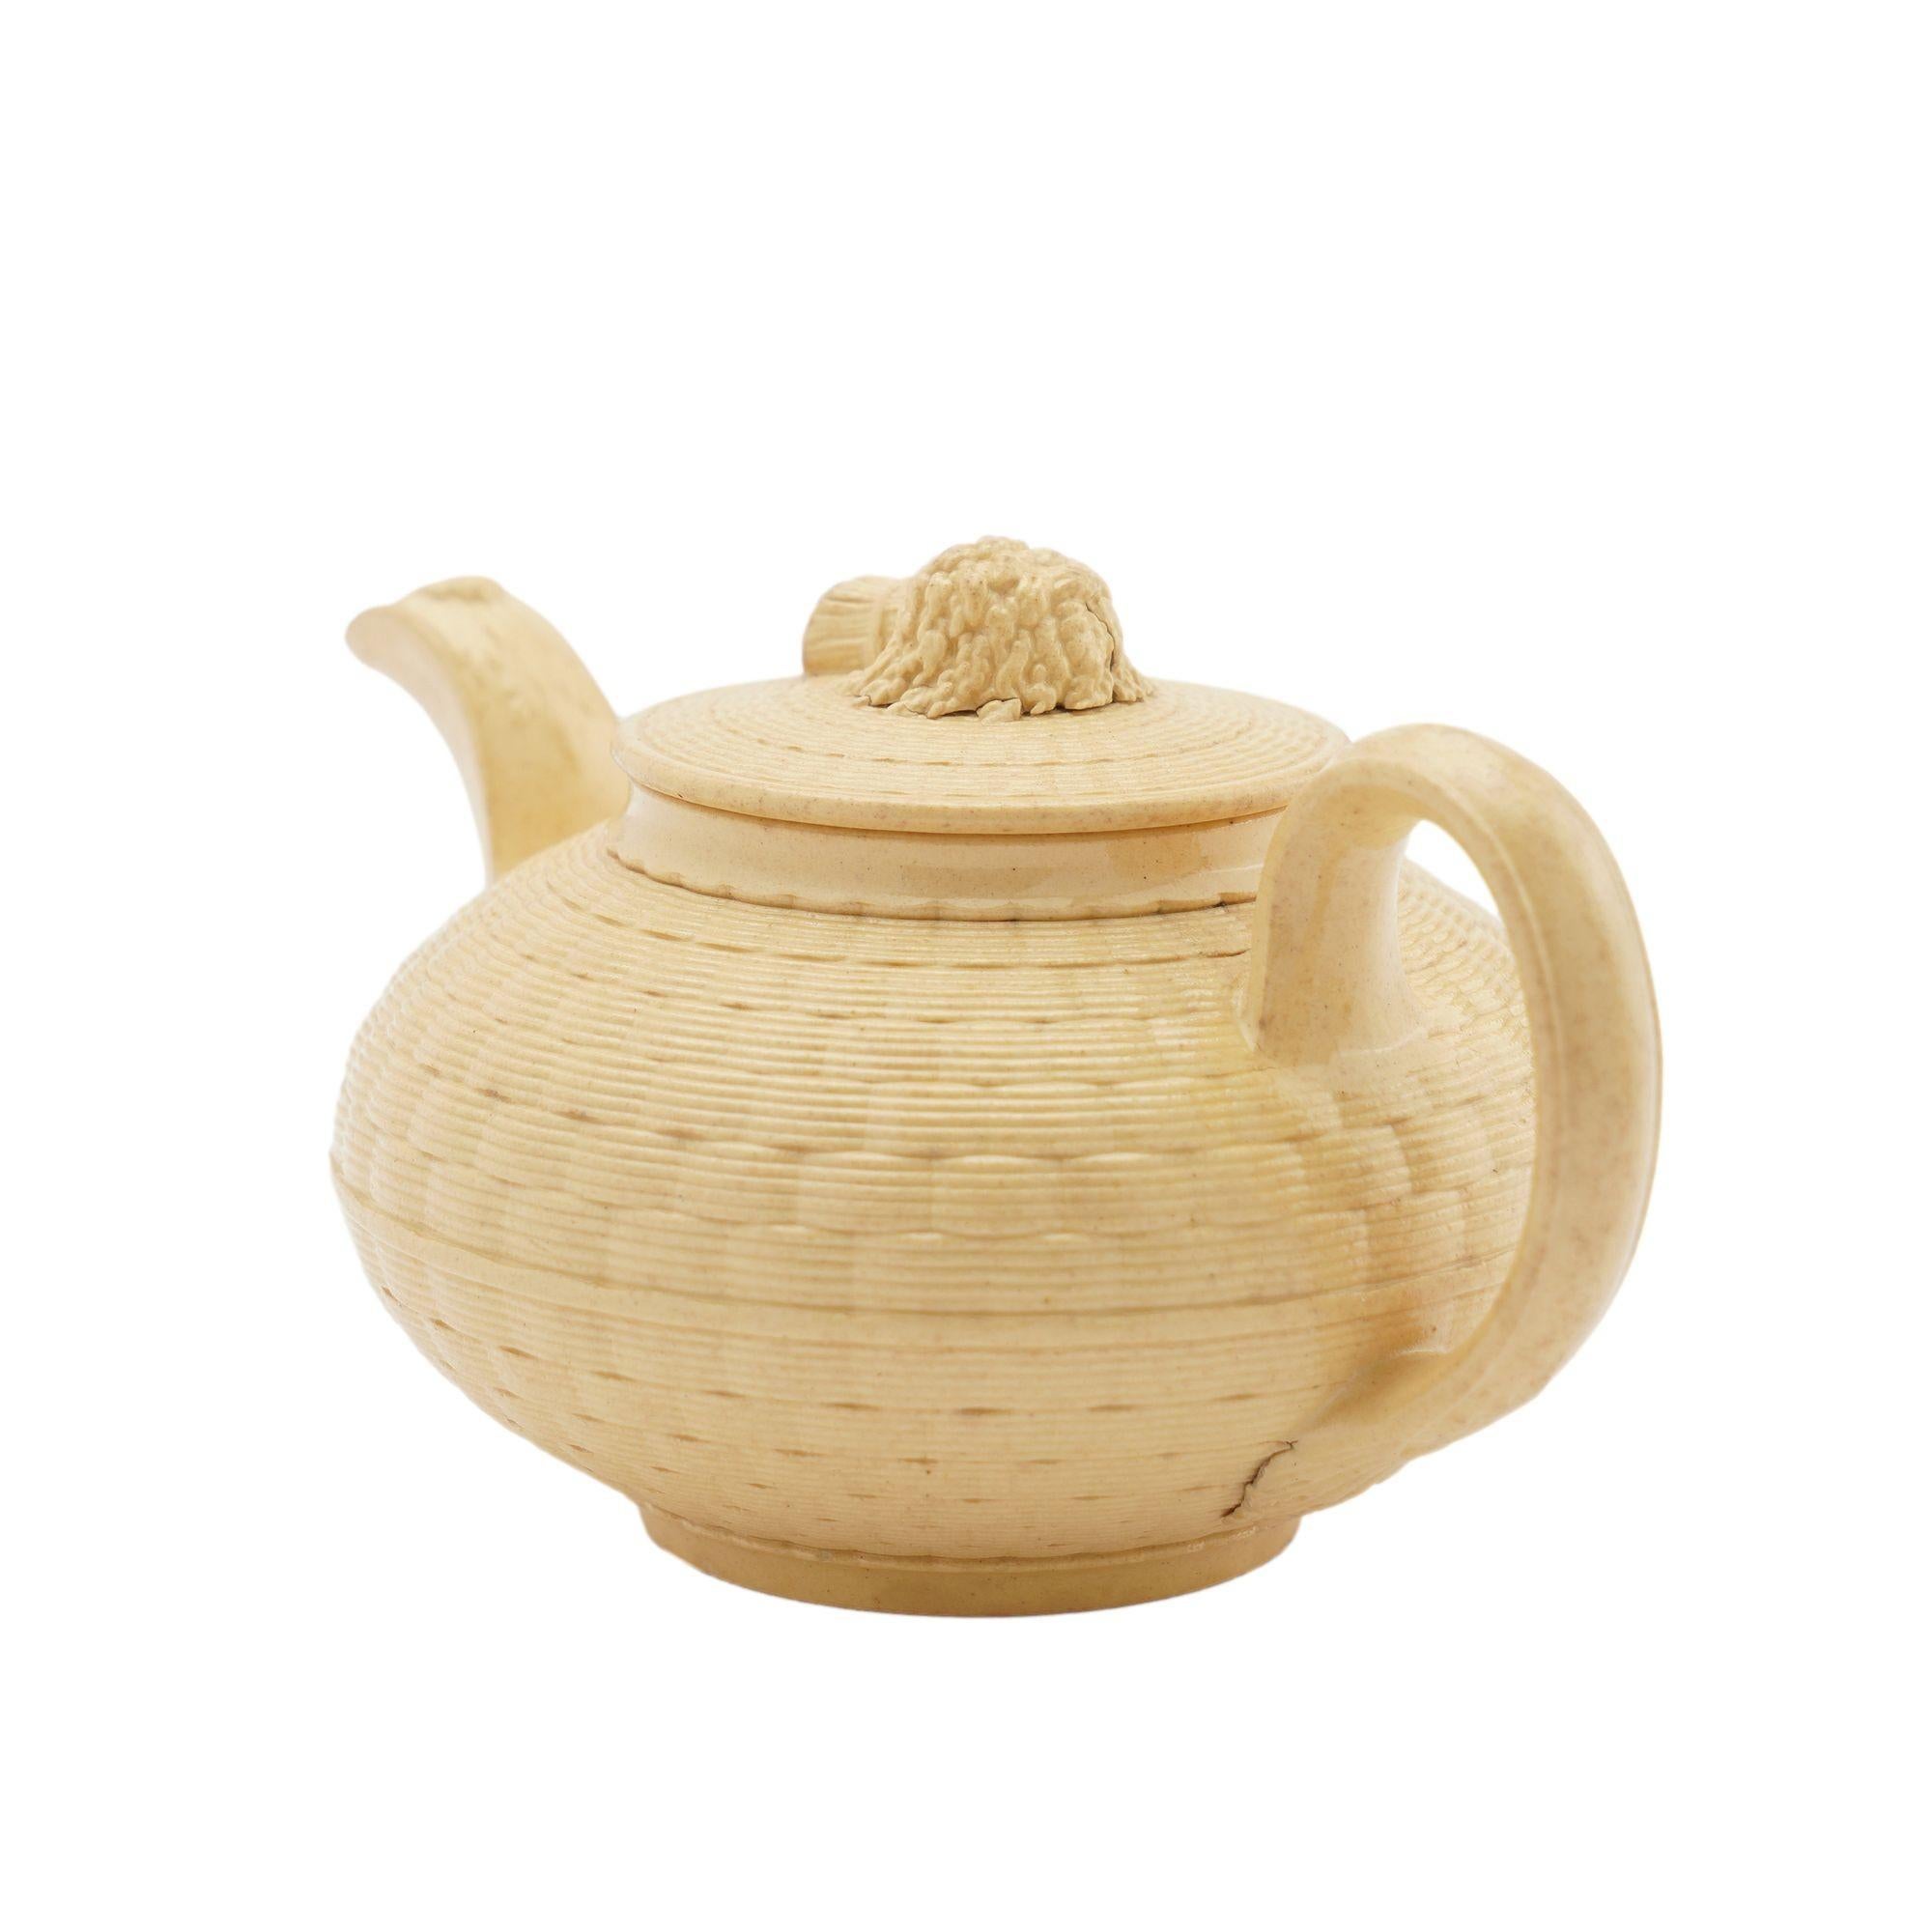 Ceramic Caneware creamer and teapot by Wedgwood, c. 1817 For Sale